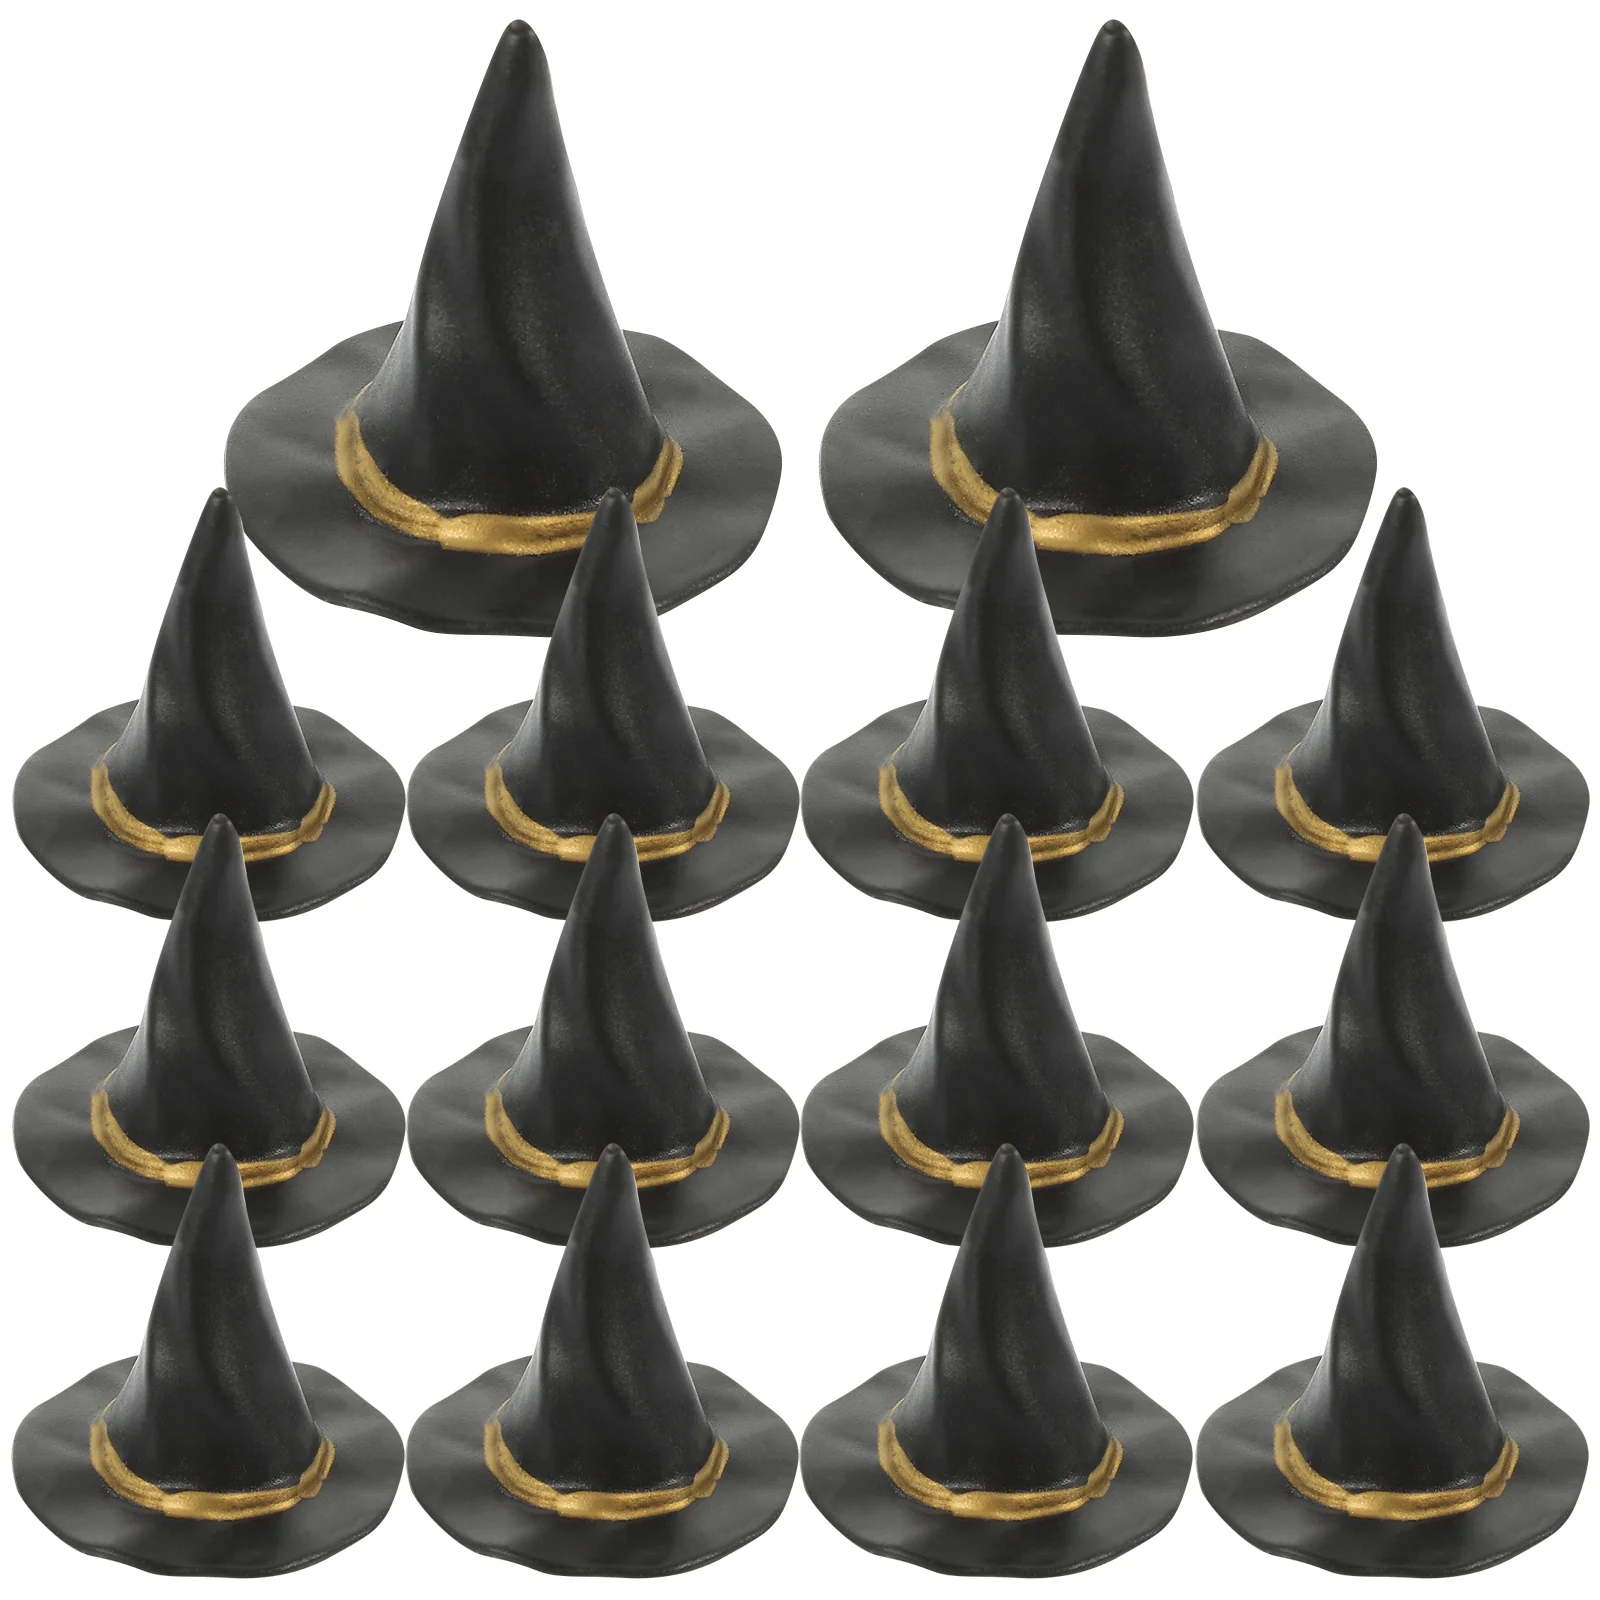 

24 Pcs Halloween Rn Cake Topper Tiny Witch Hats Crafts Ornament House Supplies Mini Drinks Plastic Decor